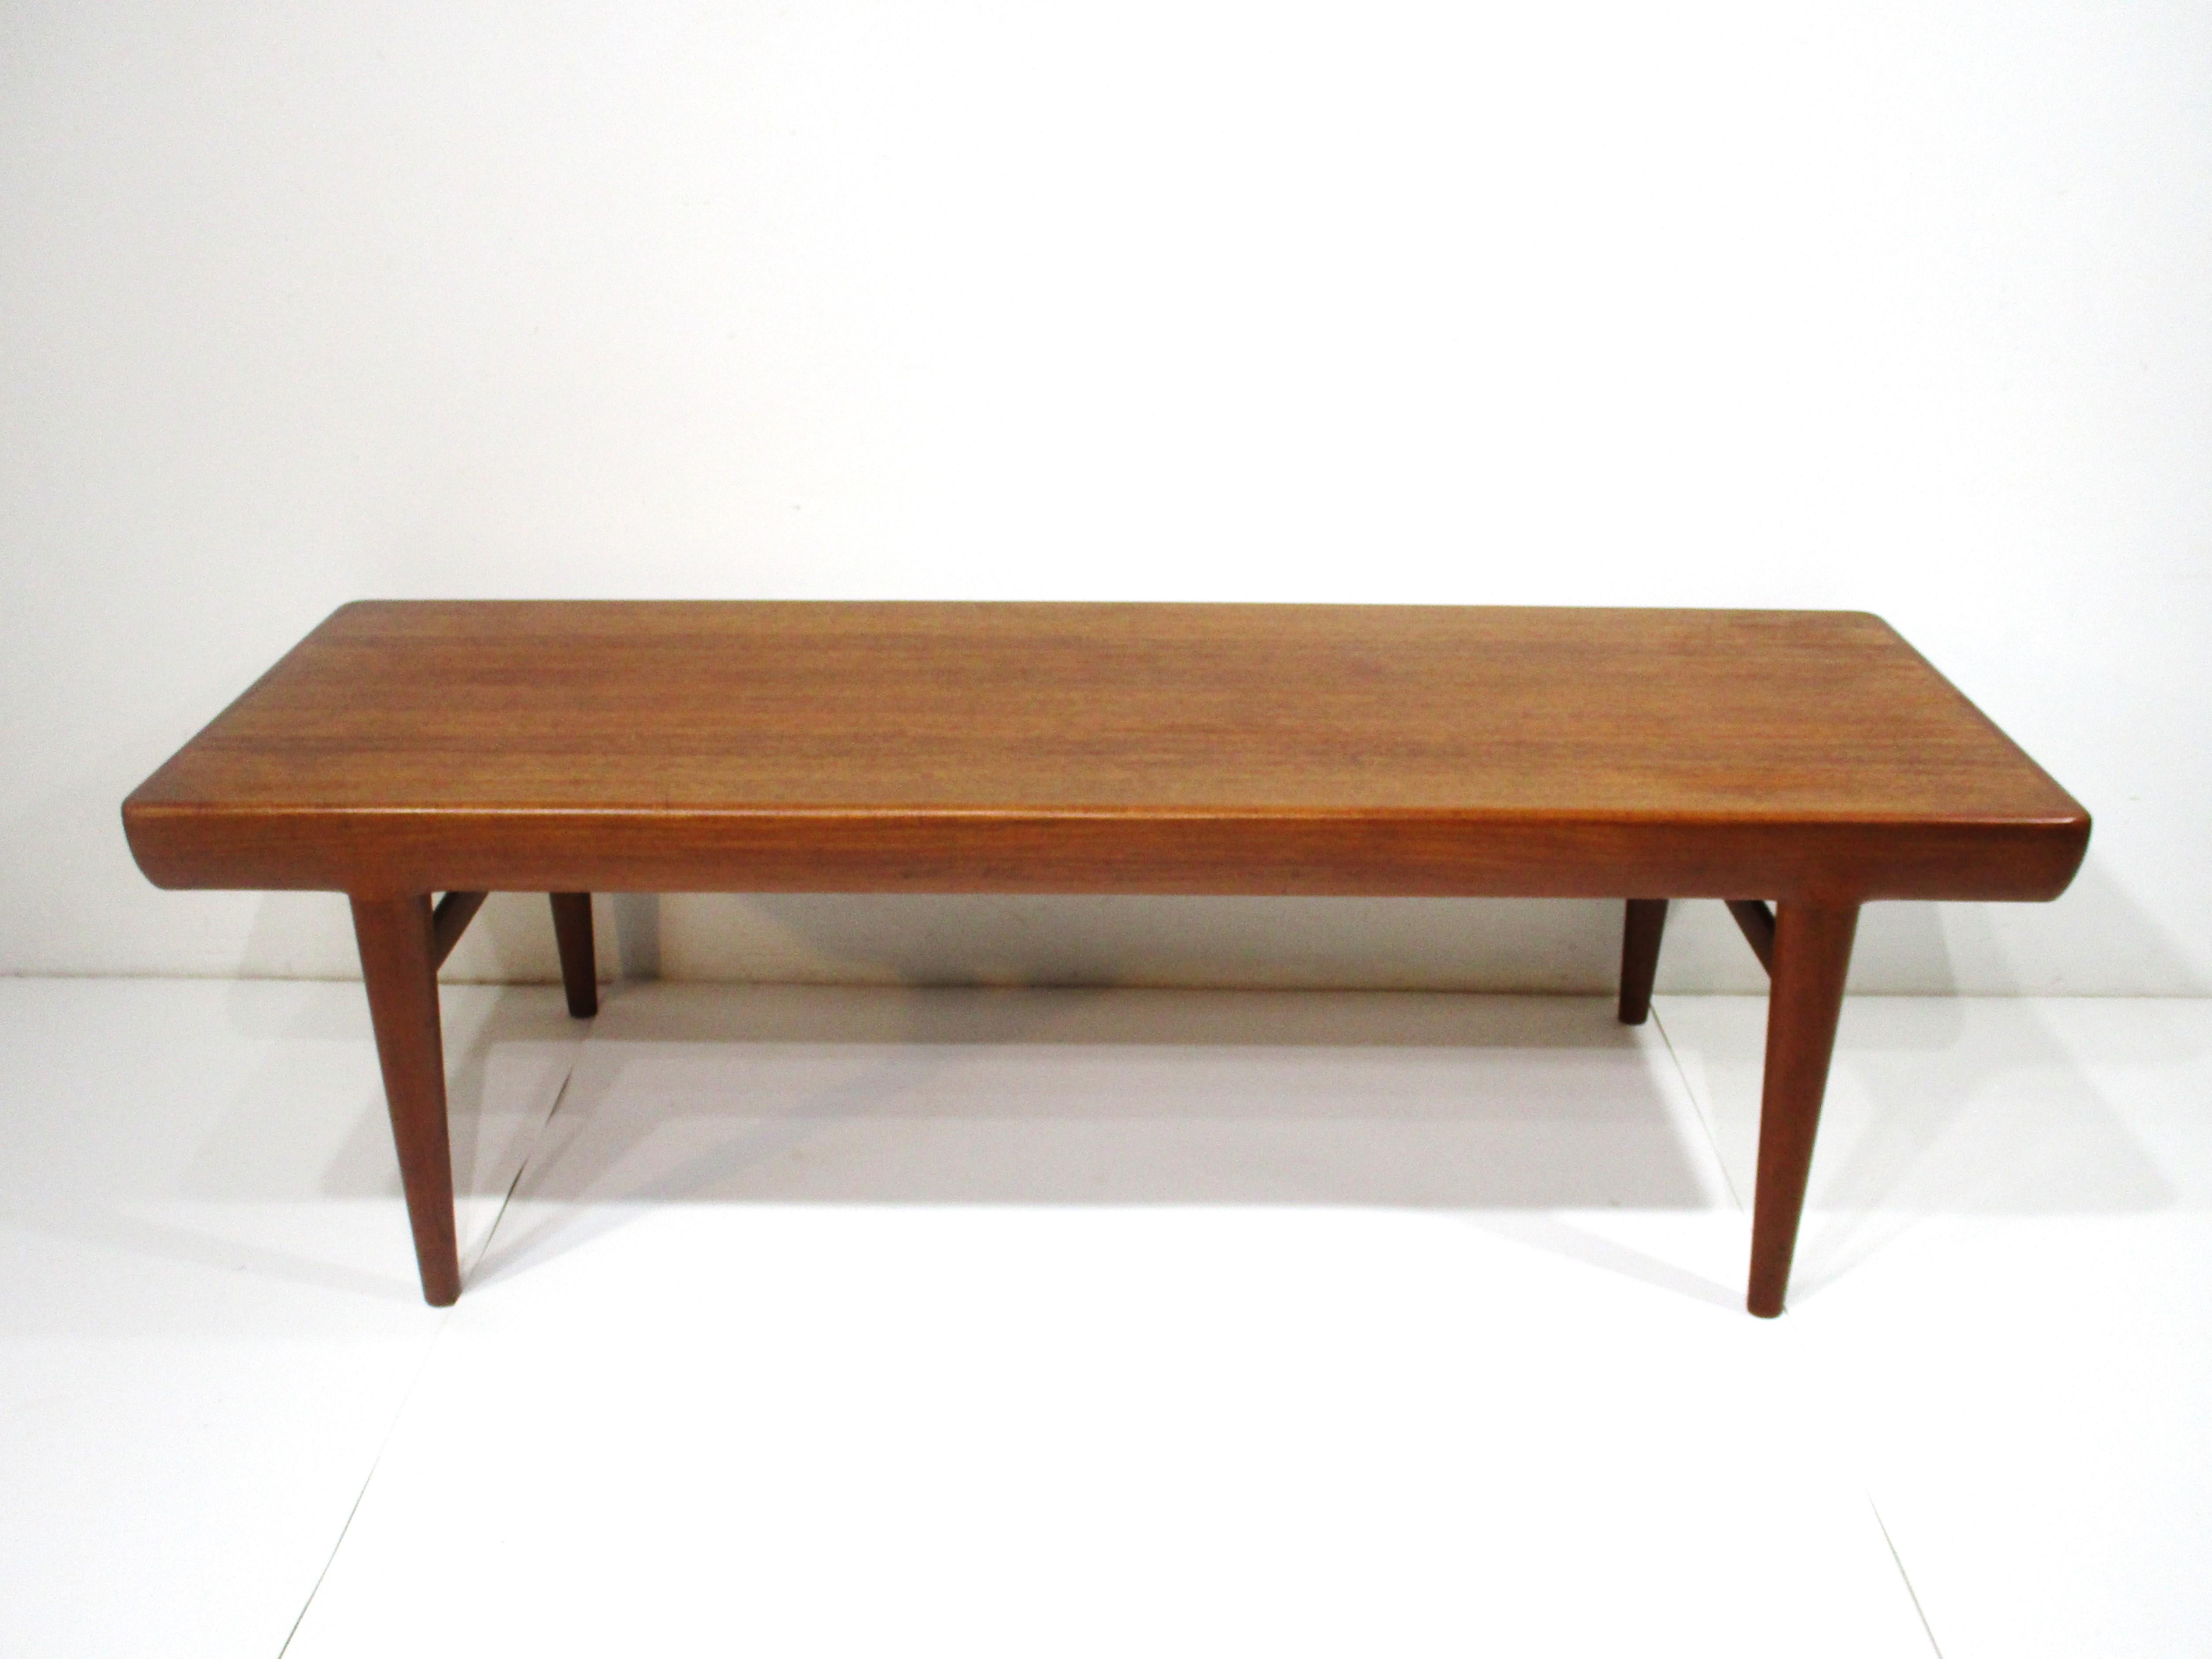 A very well made Danish modern teak wood coffee table with rare pull out end drawers . One side is a drawer with storage and the other end has black and white reversible covers over divided storage areas , just a nice design detail . The